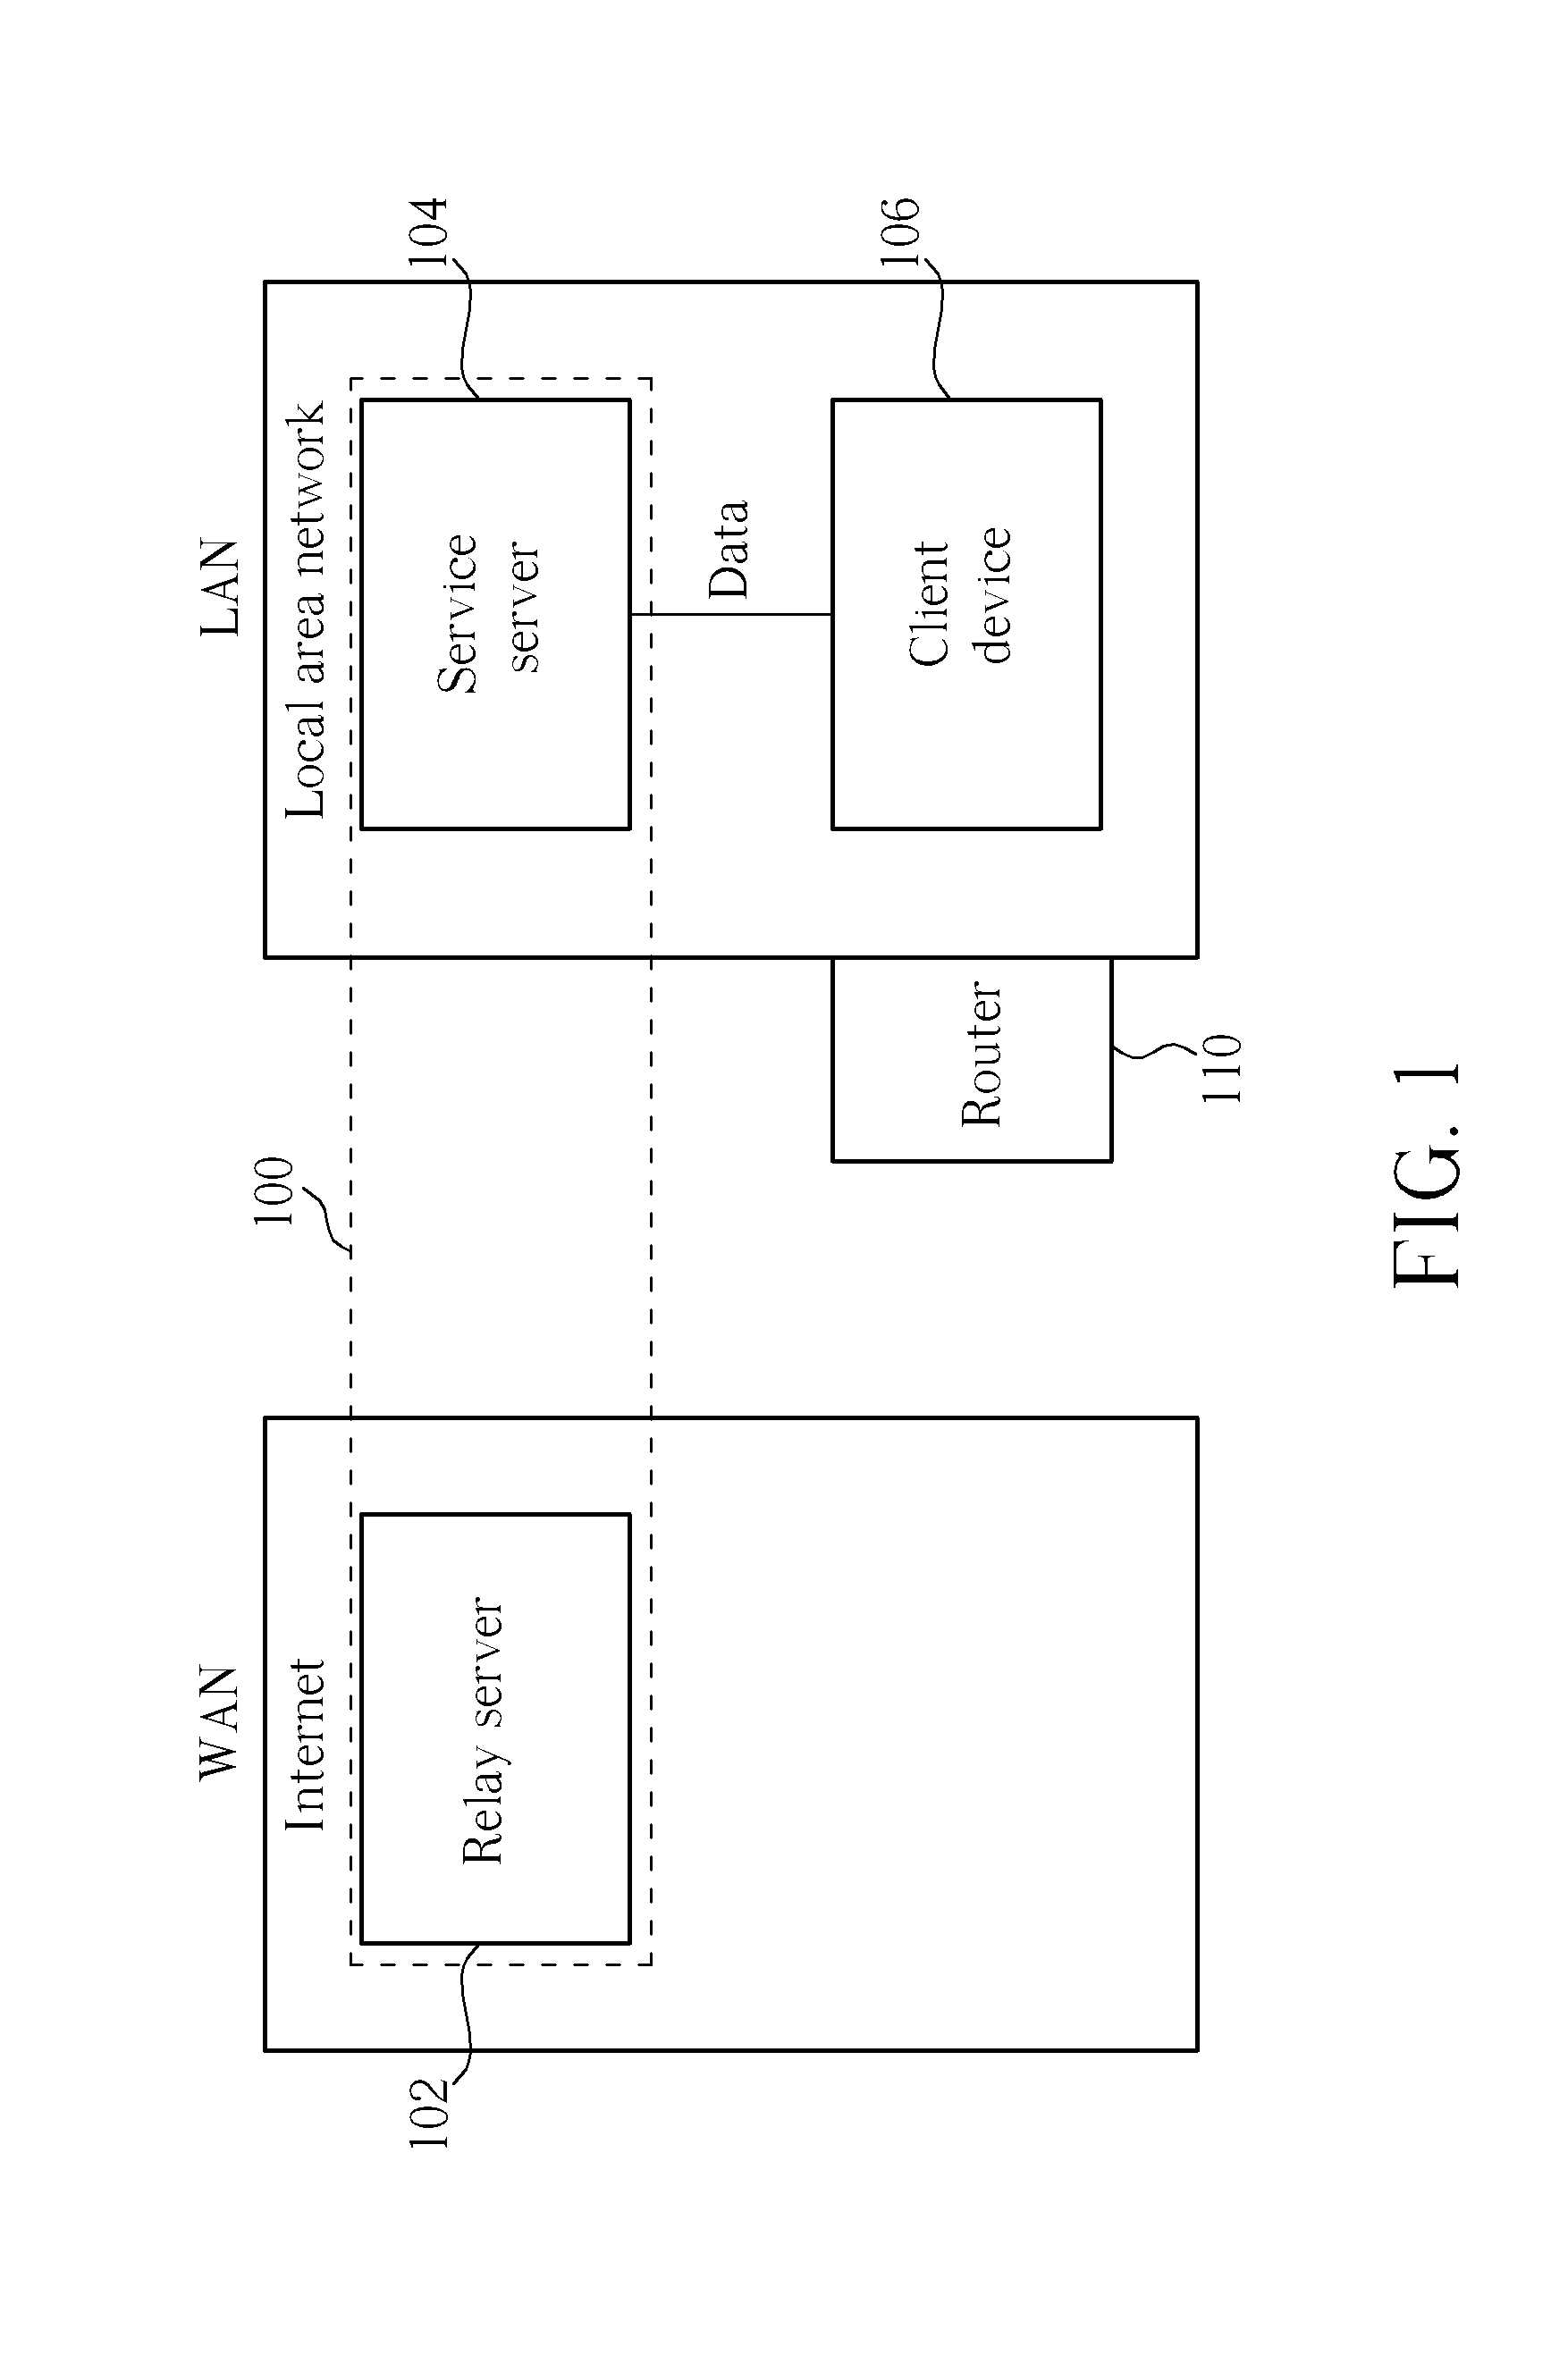 System for providing a bidirectional data access service and method thereof